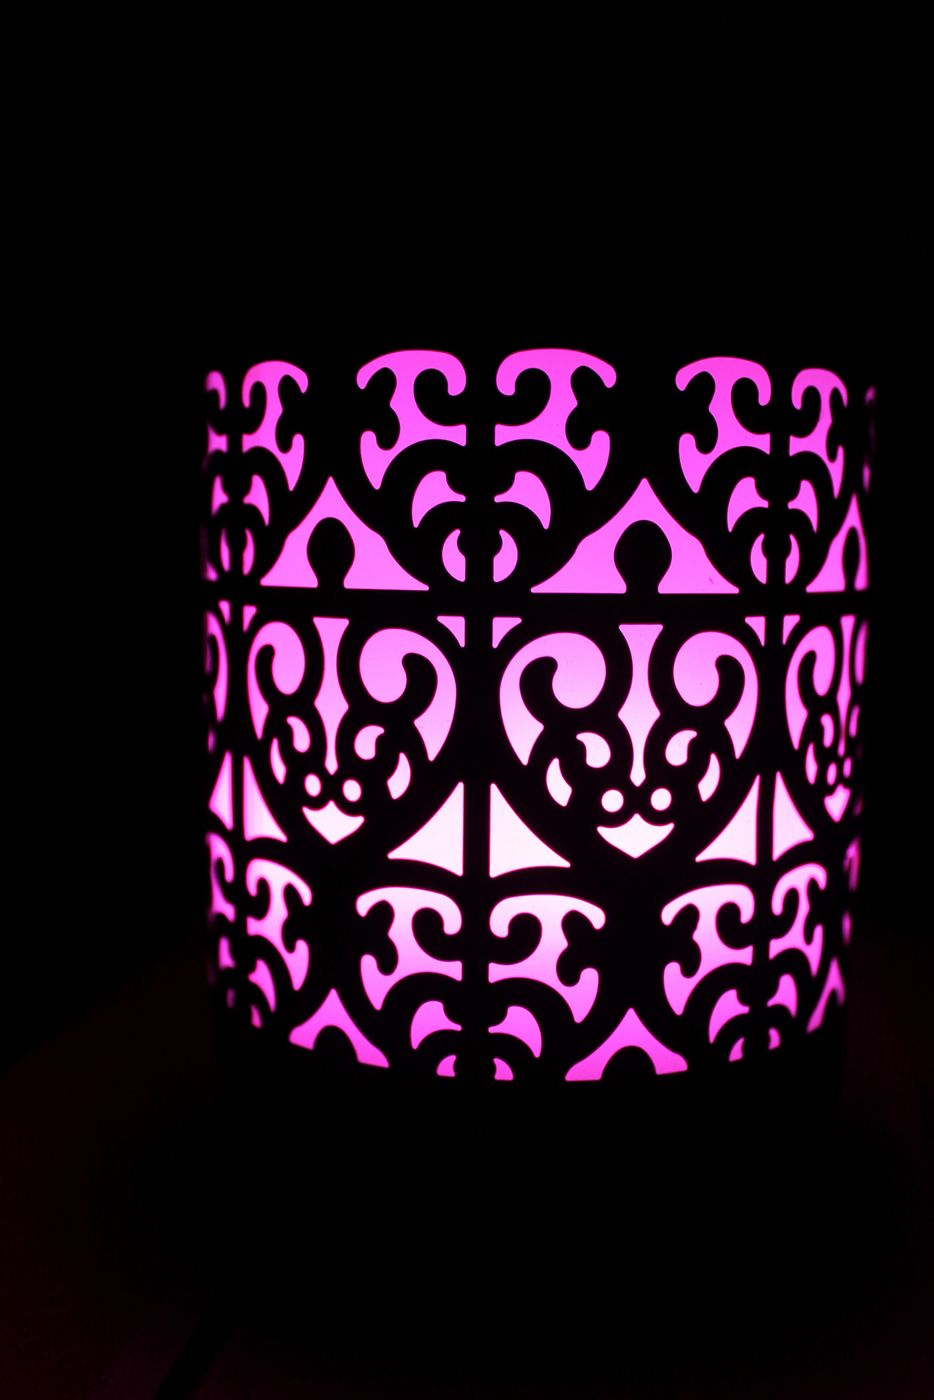 An essential oil diffuser lighting up in the dark 